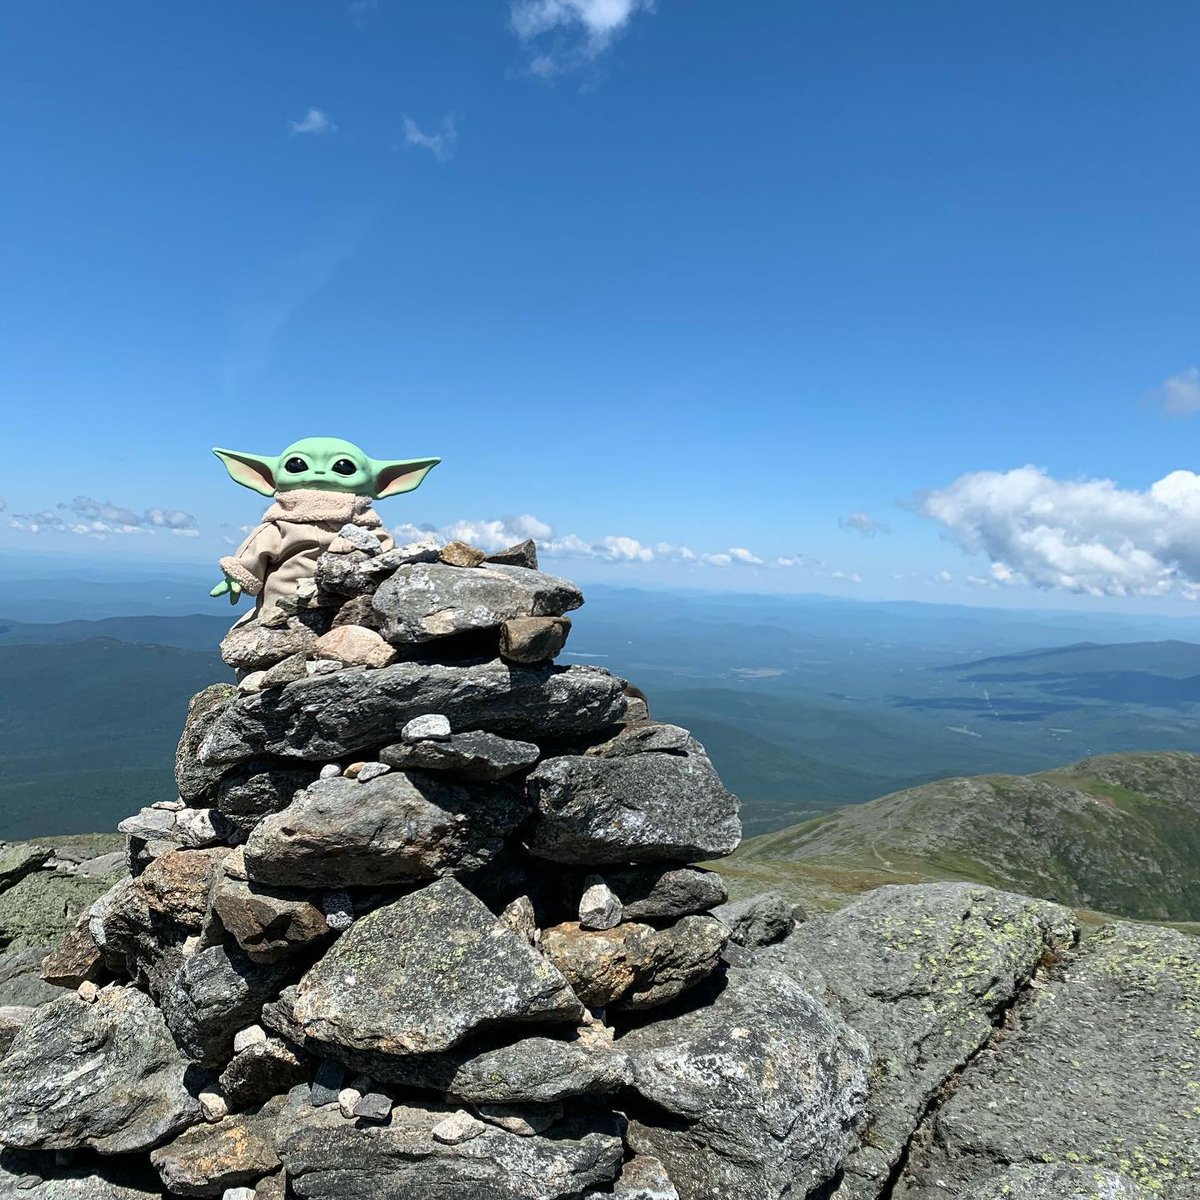 May the 4th be with you!
📷: @lakelifewithbabyyoda
#StarWarsDay #WhiteMountains